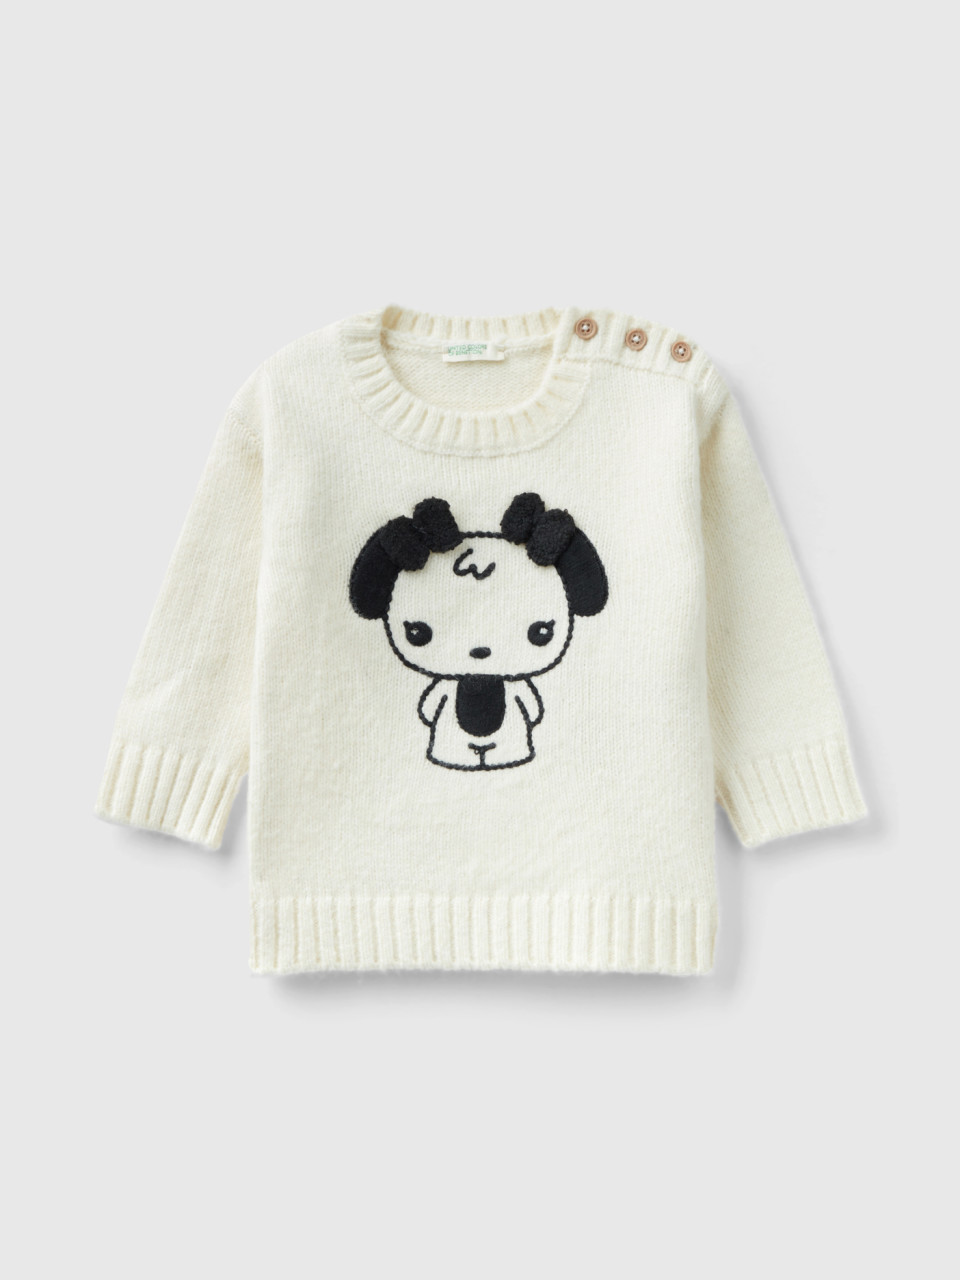 Benetton, Sweater With Embroidery And Applique, Creamy White, Kids